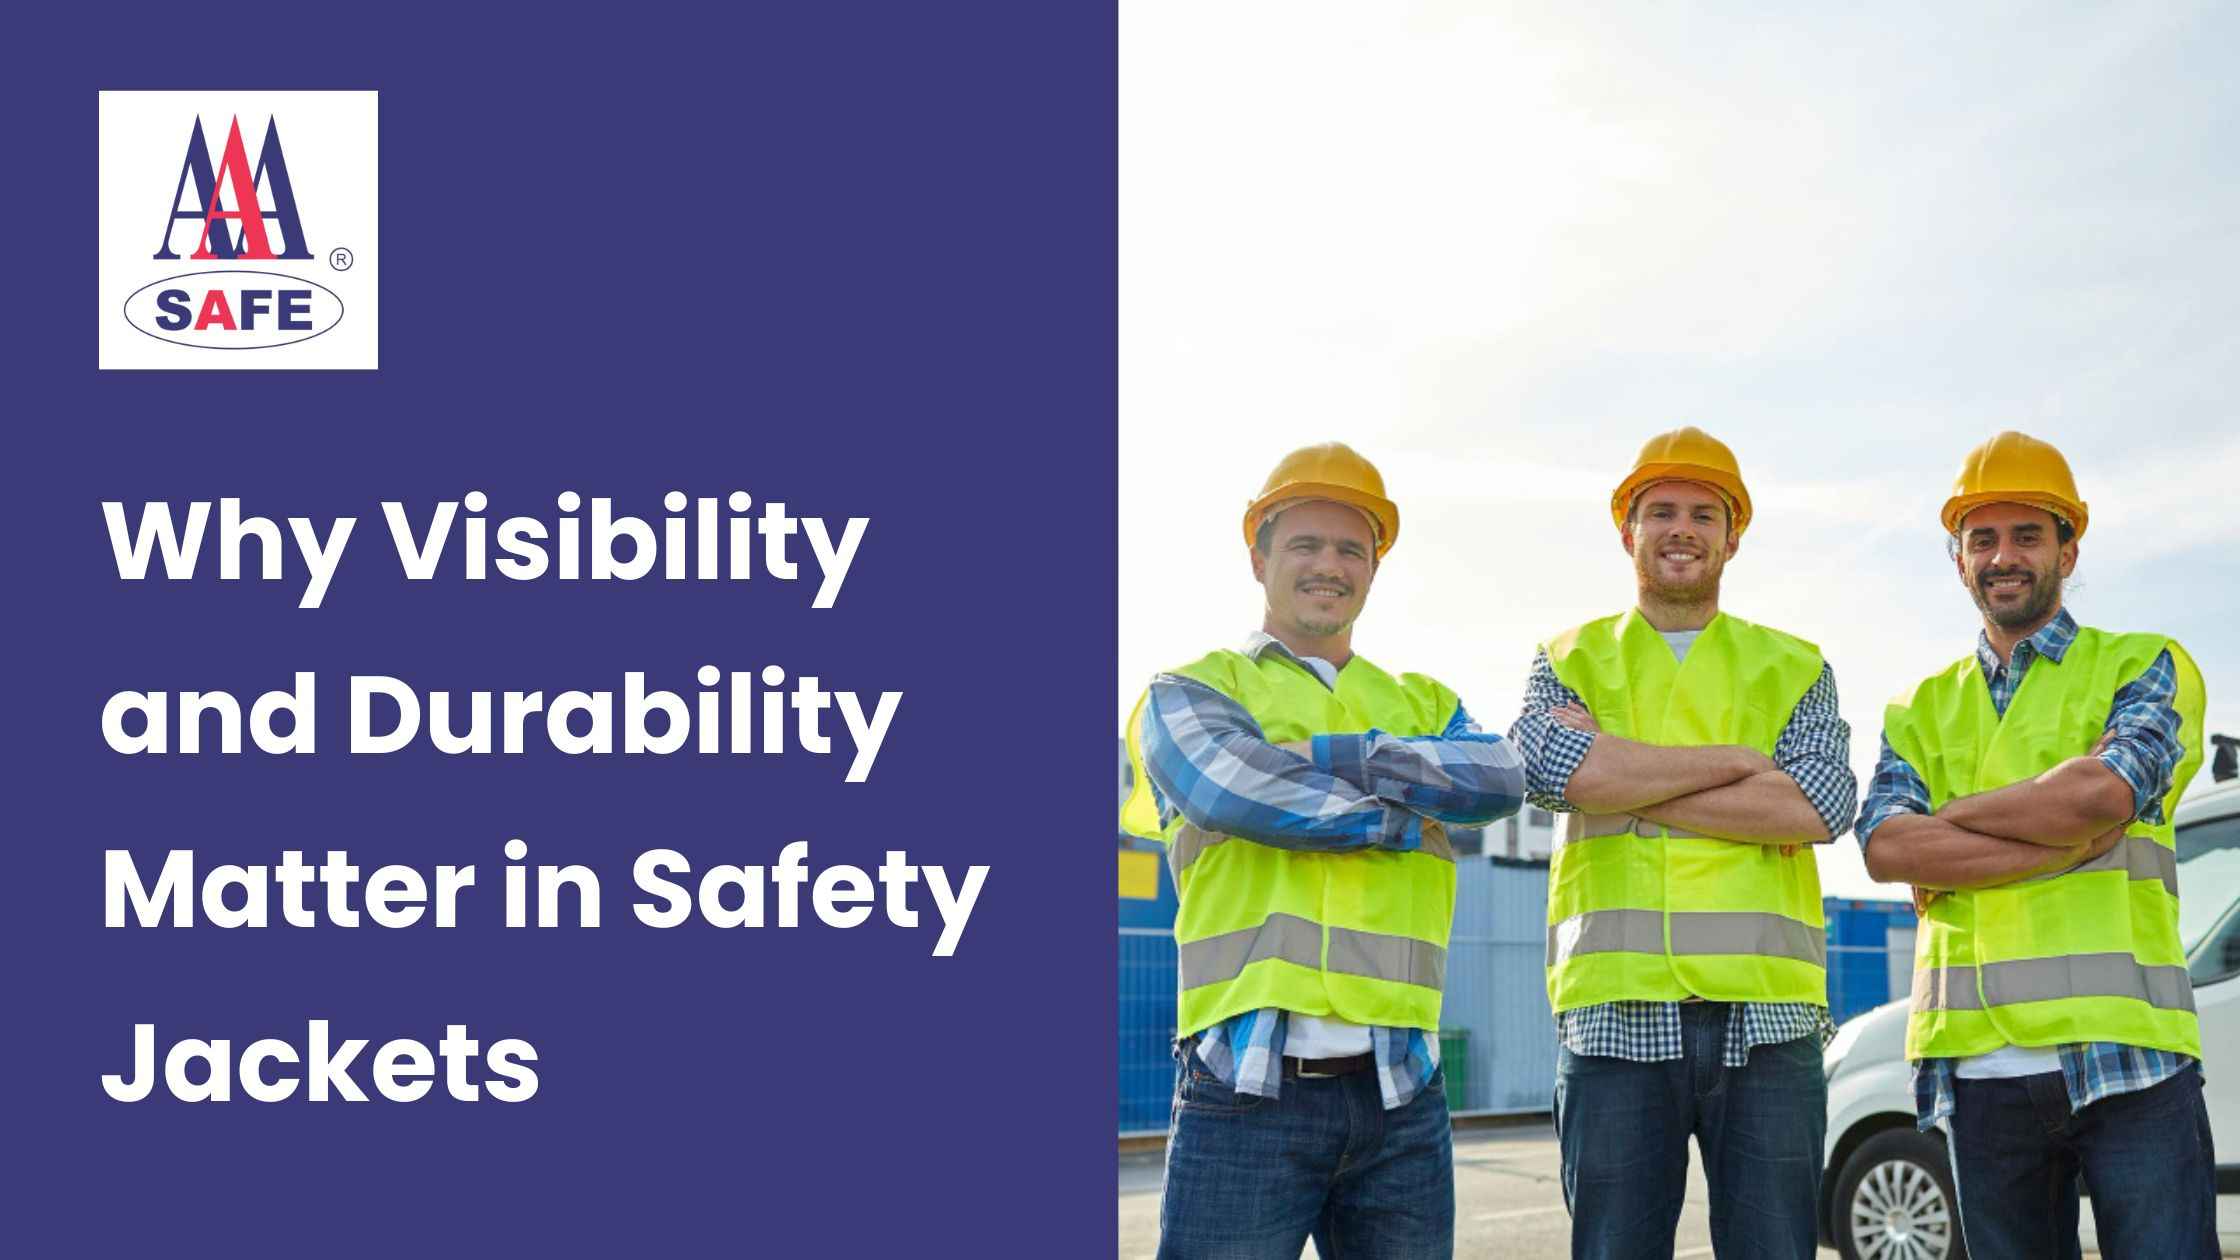 Why Visibility and Durability Matter in Safety Jackets